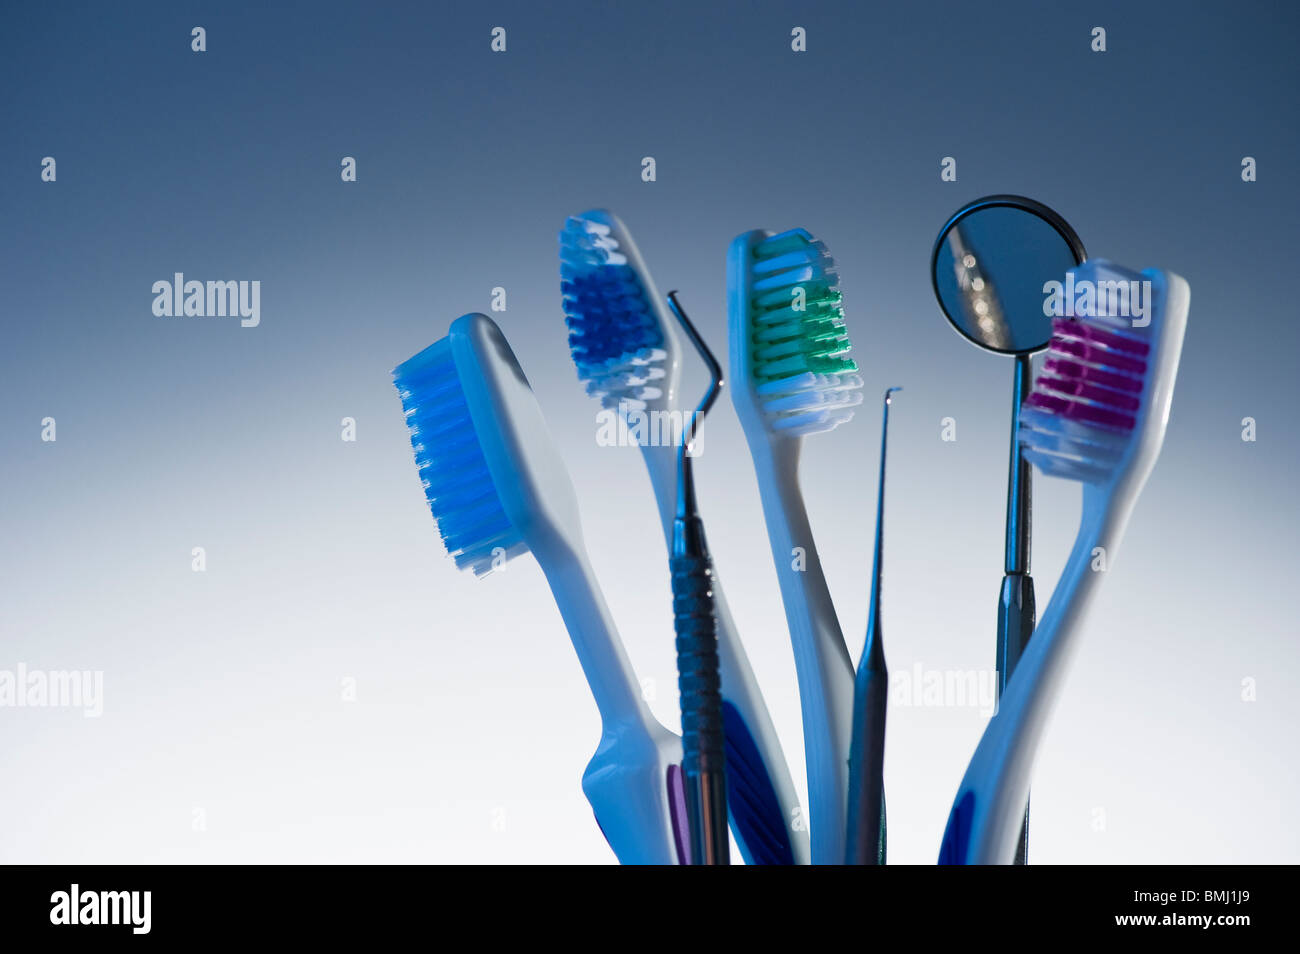 Toothbrushes and dental instruments Stock Photo